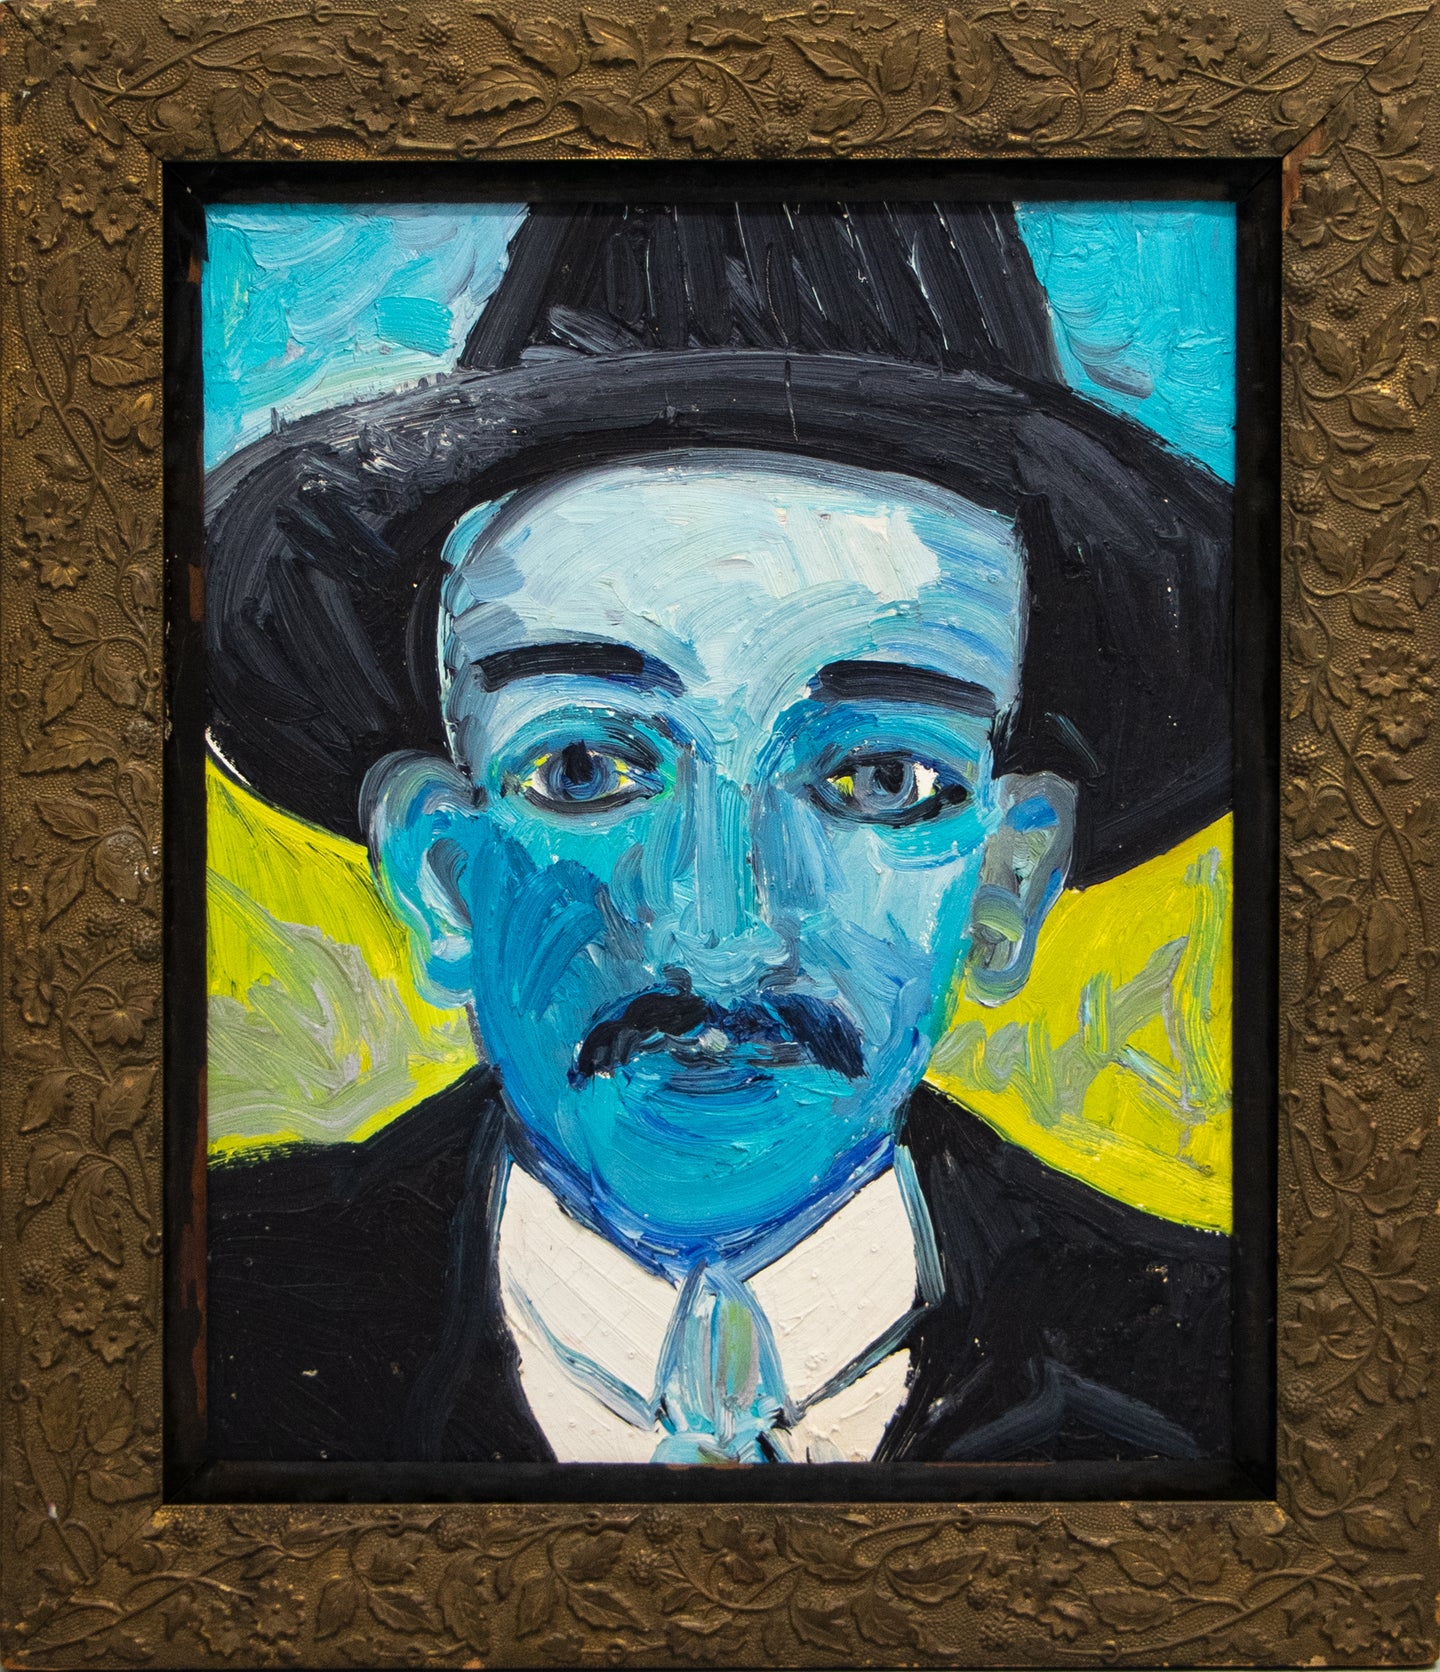 Hunt Slonem (b. 1951-) Dr. Hernandez, 1988  Oil on canvas  16 x 20  25 x 21.5 inches Framed , Dr. Hernandez, painting of his face,His shaman-like persona equally inspired Slonem, who was drawn to the figure as a medium of transcendence for his own art, through which his innermost beliefs are channeled, imbuing images with metaphysical meaning. Available at Manolis Projects Gallery